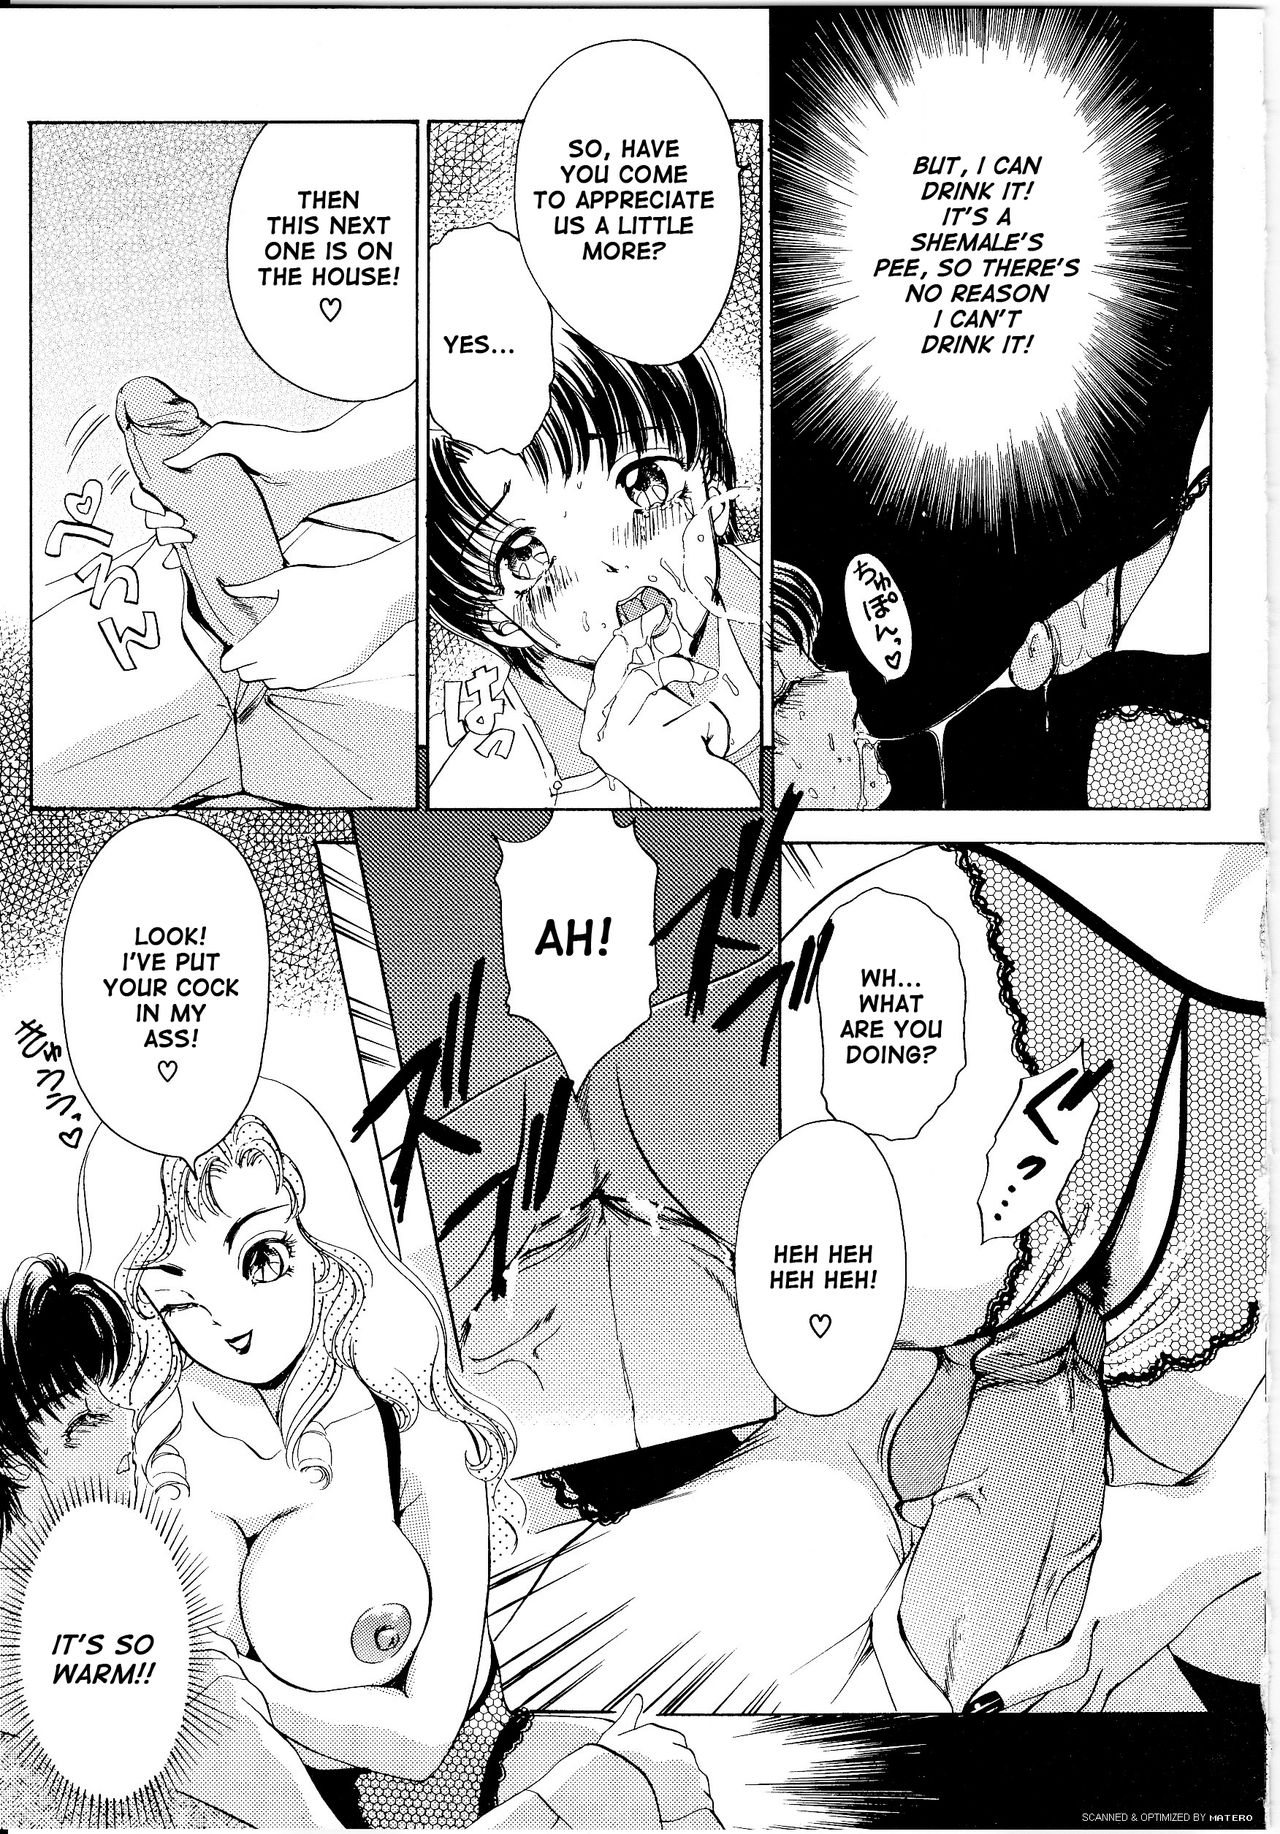 [The Amanoja9] T.S. I LOVE YOU... 1 Chapter 13 [English] 